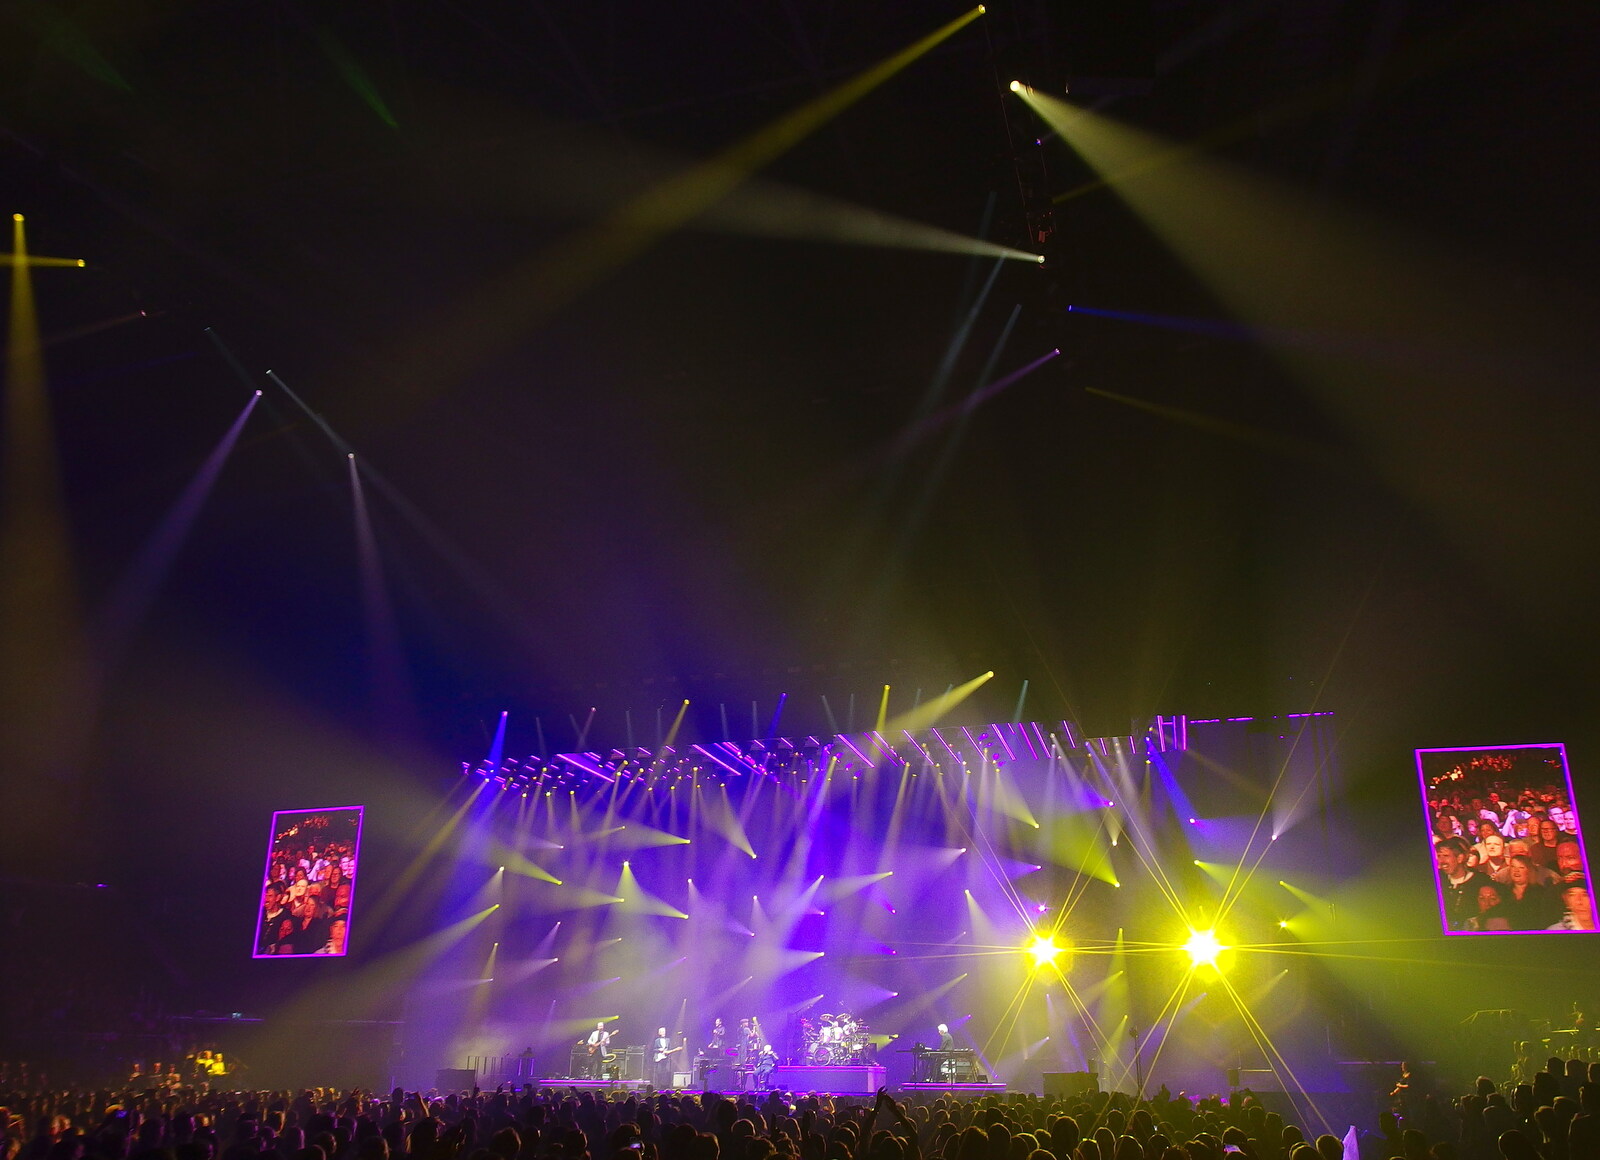 A wide view of the lights and stage from Genesis at the O2, North Greenwich, London - 24th March 2022